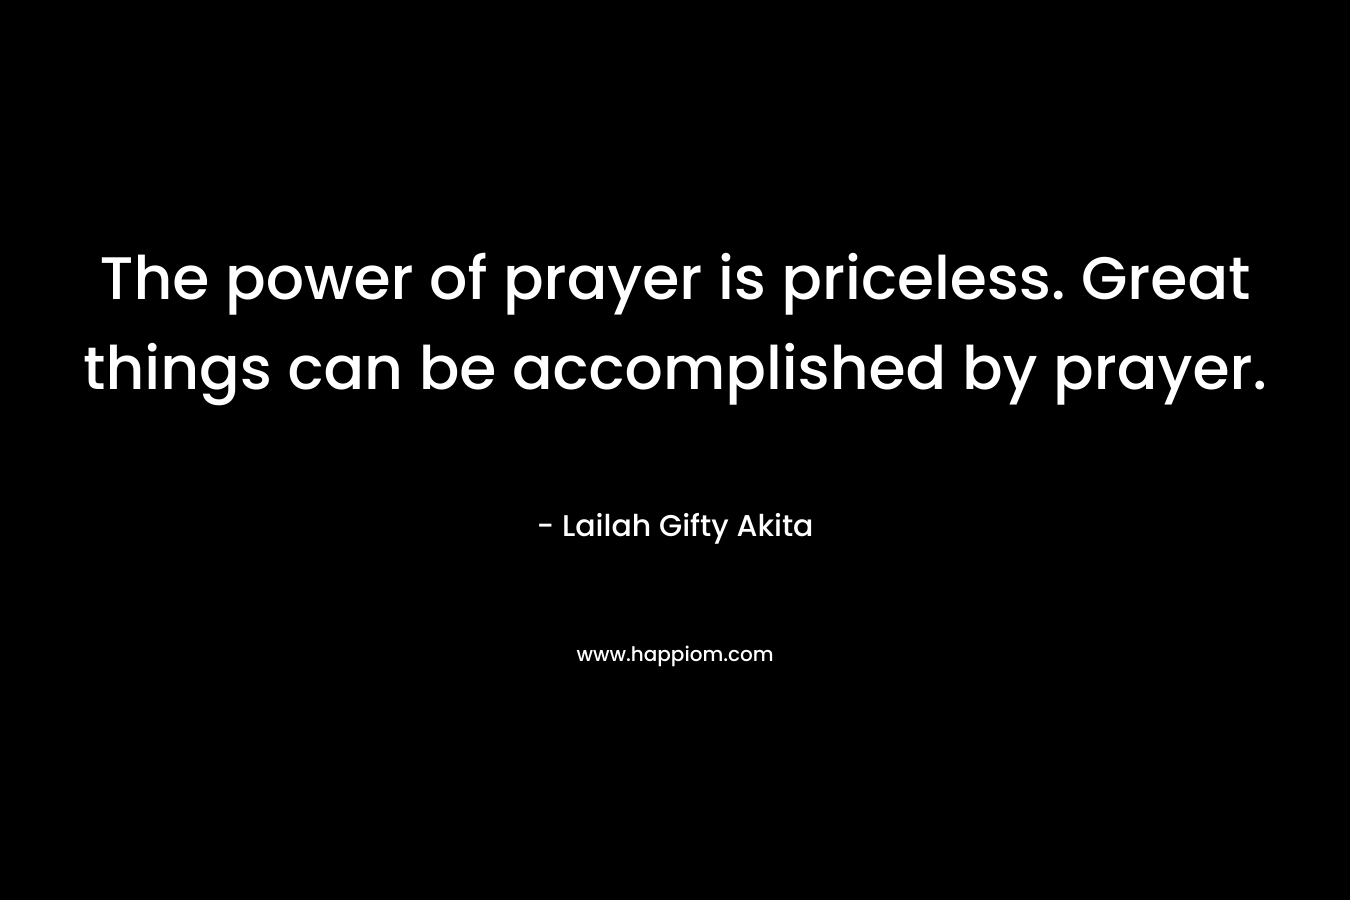 The power of prayer is priceless. Great things can be accomplished by prayer.